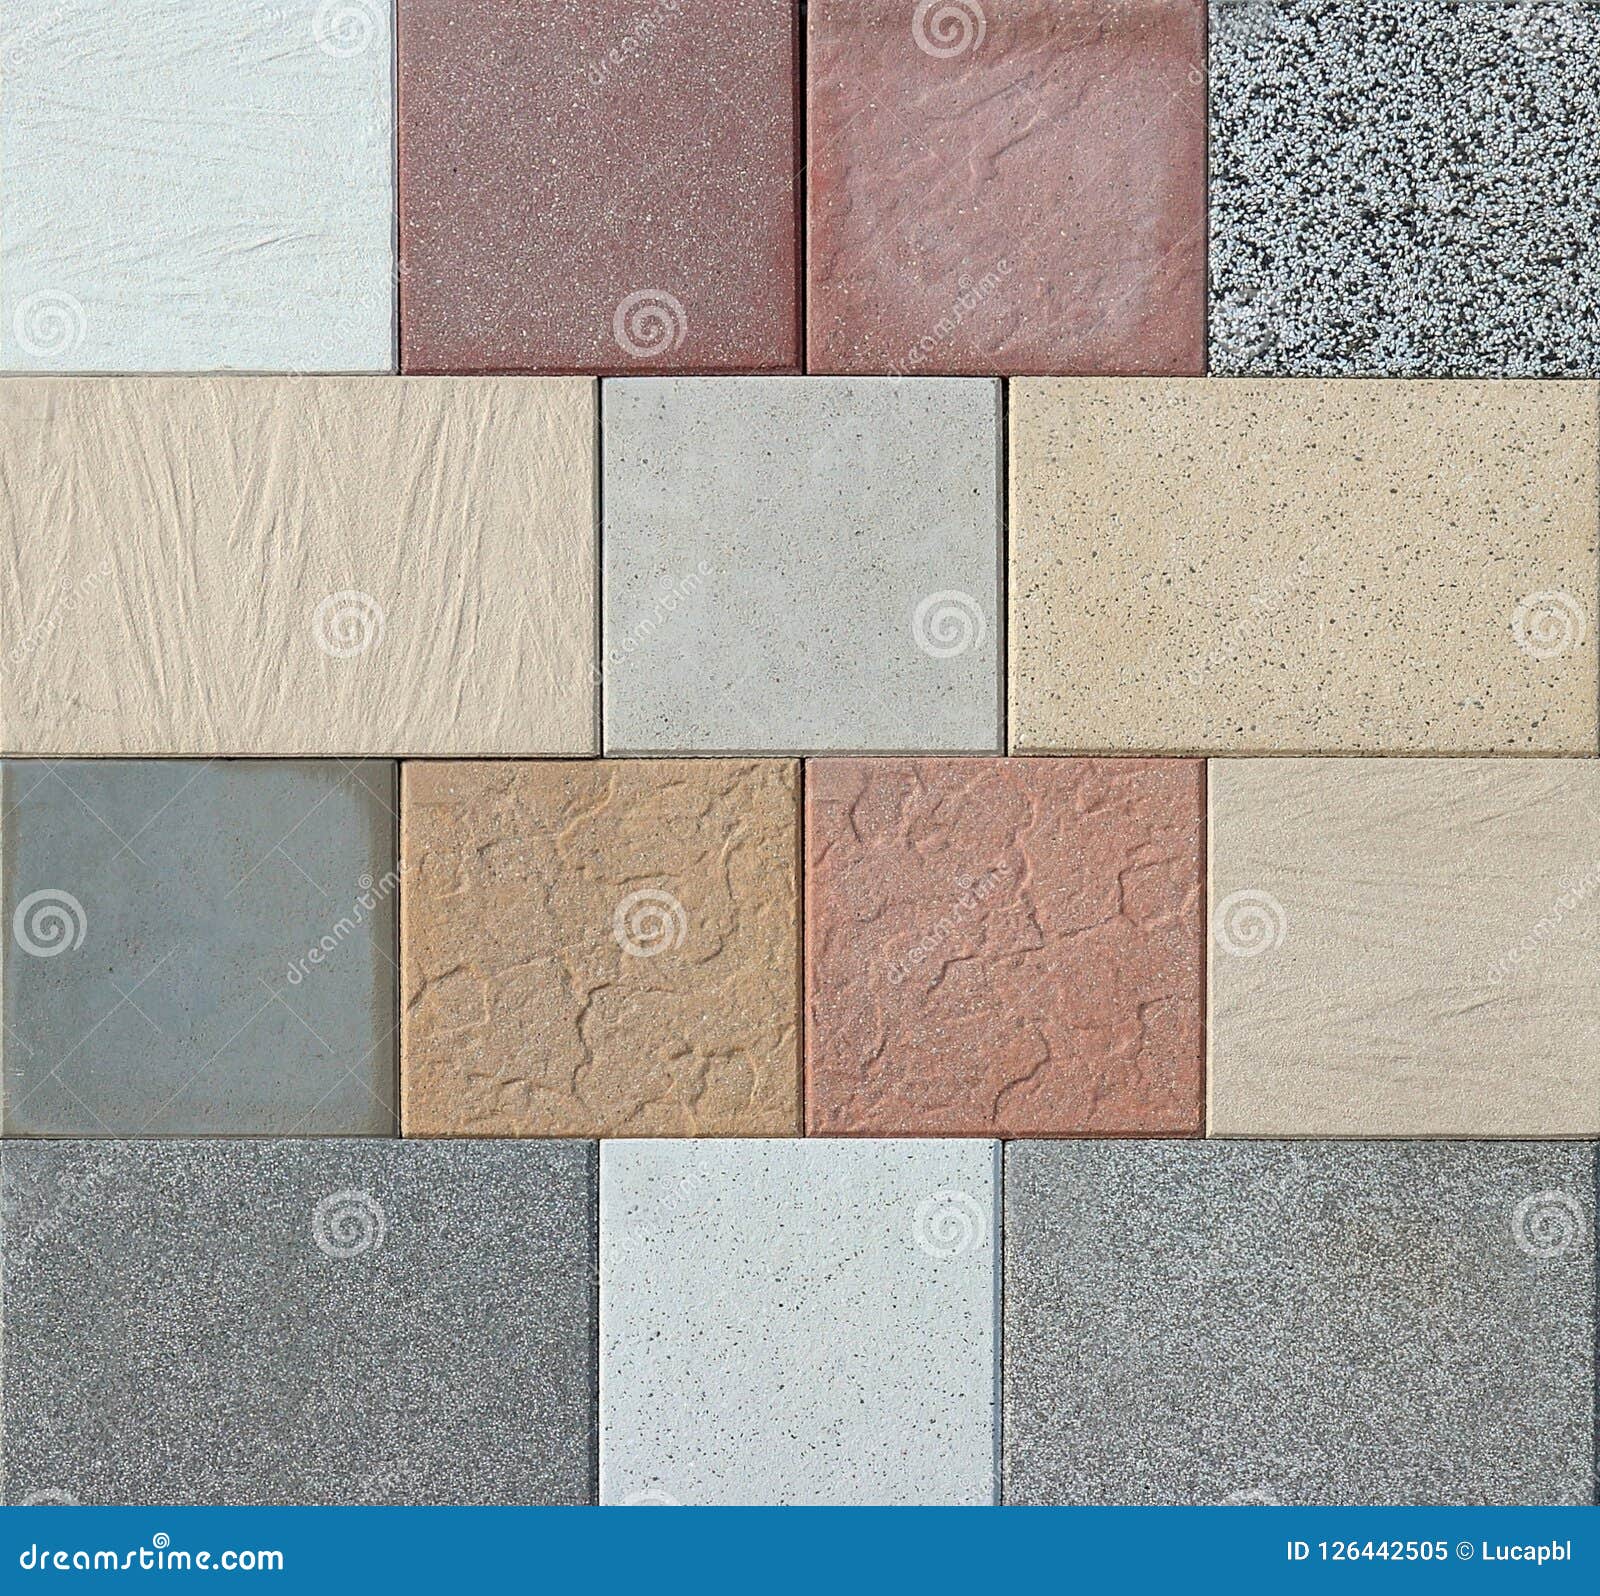 Samples Of Colorful Outdoor Stone Tiles Stock Image Image Of